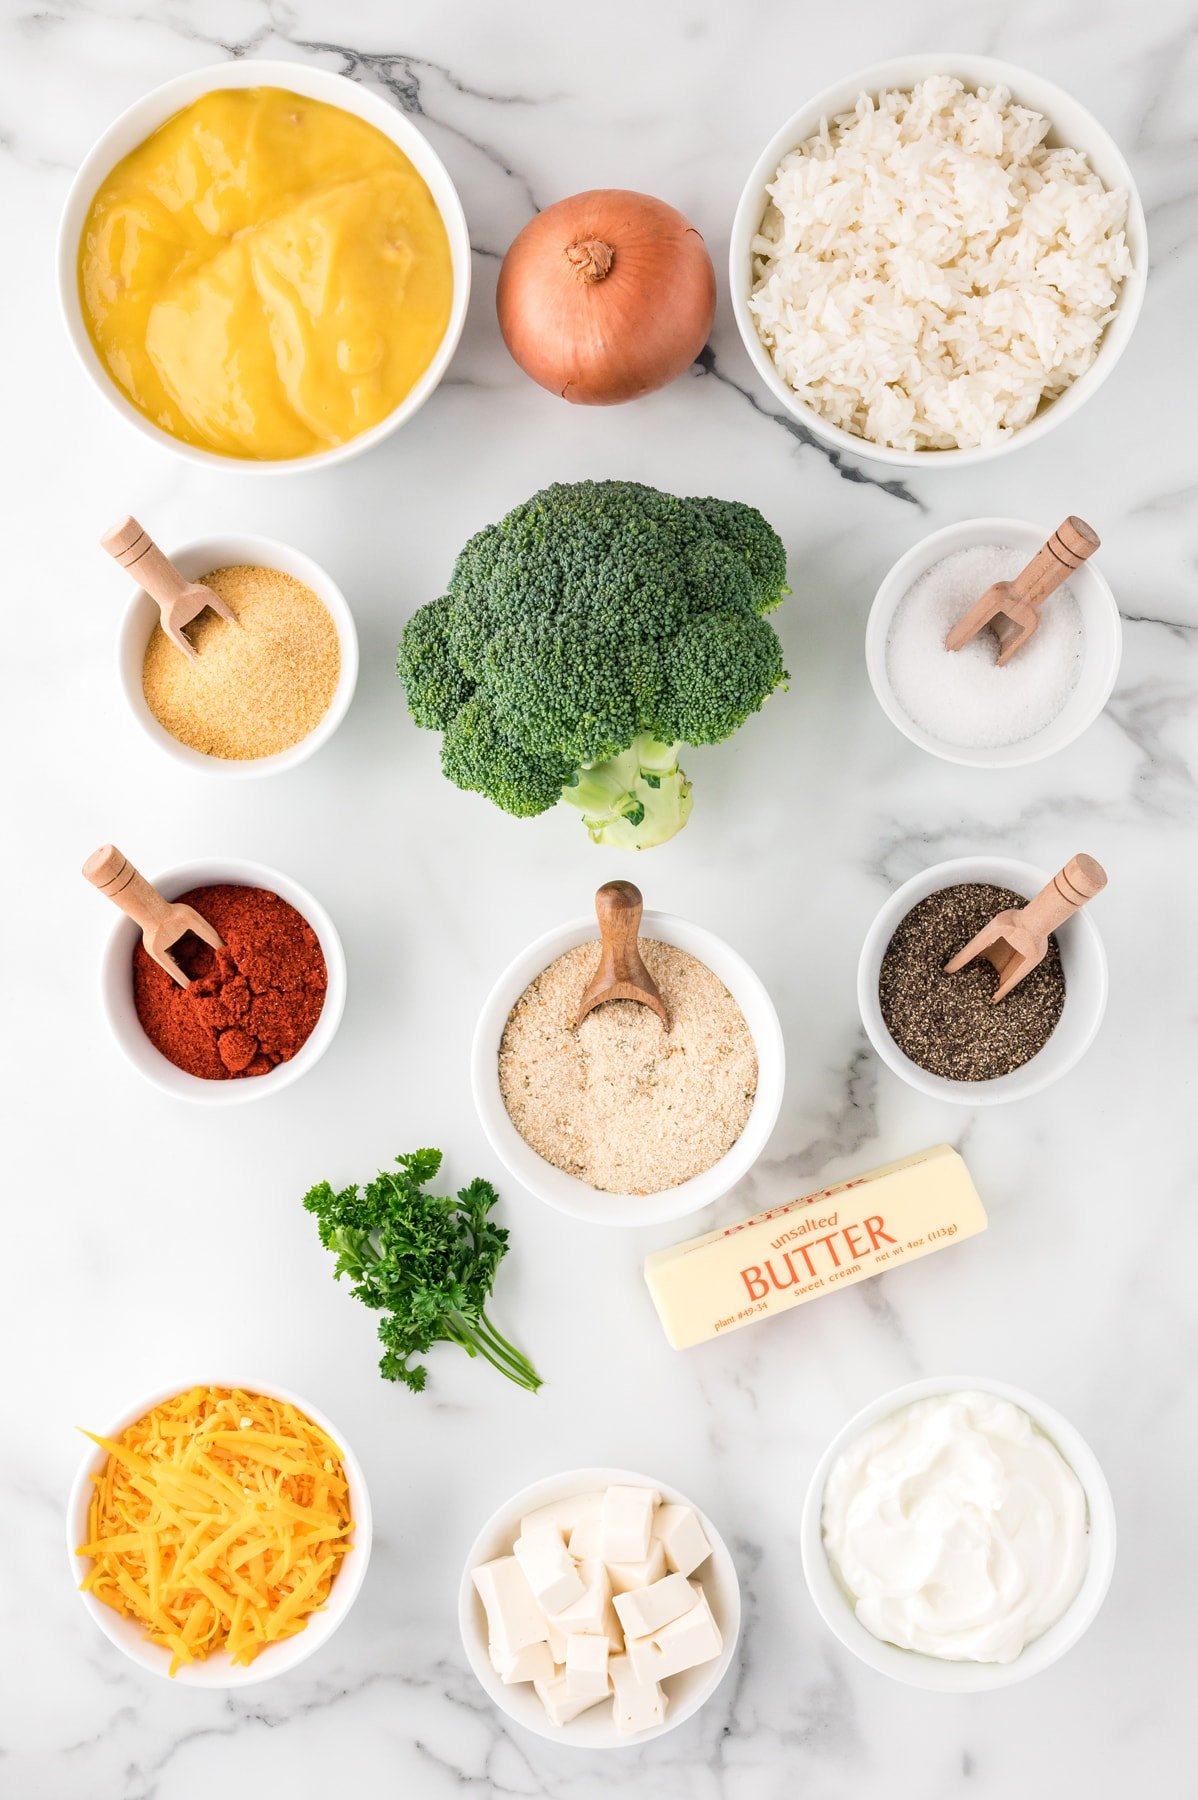 Overhead view of ingredients needed for broccoli and rice casserole